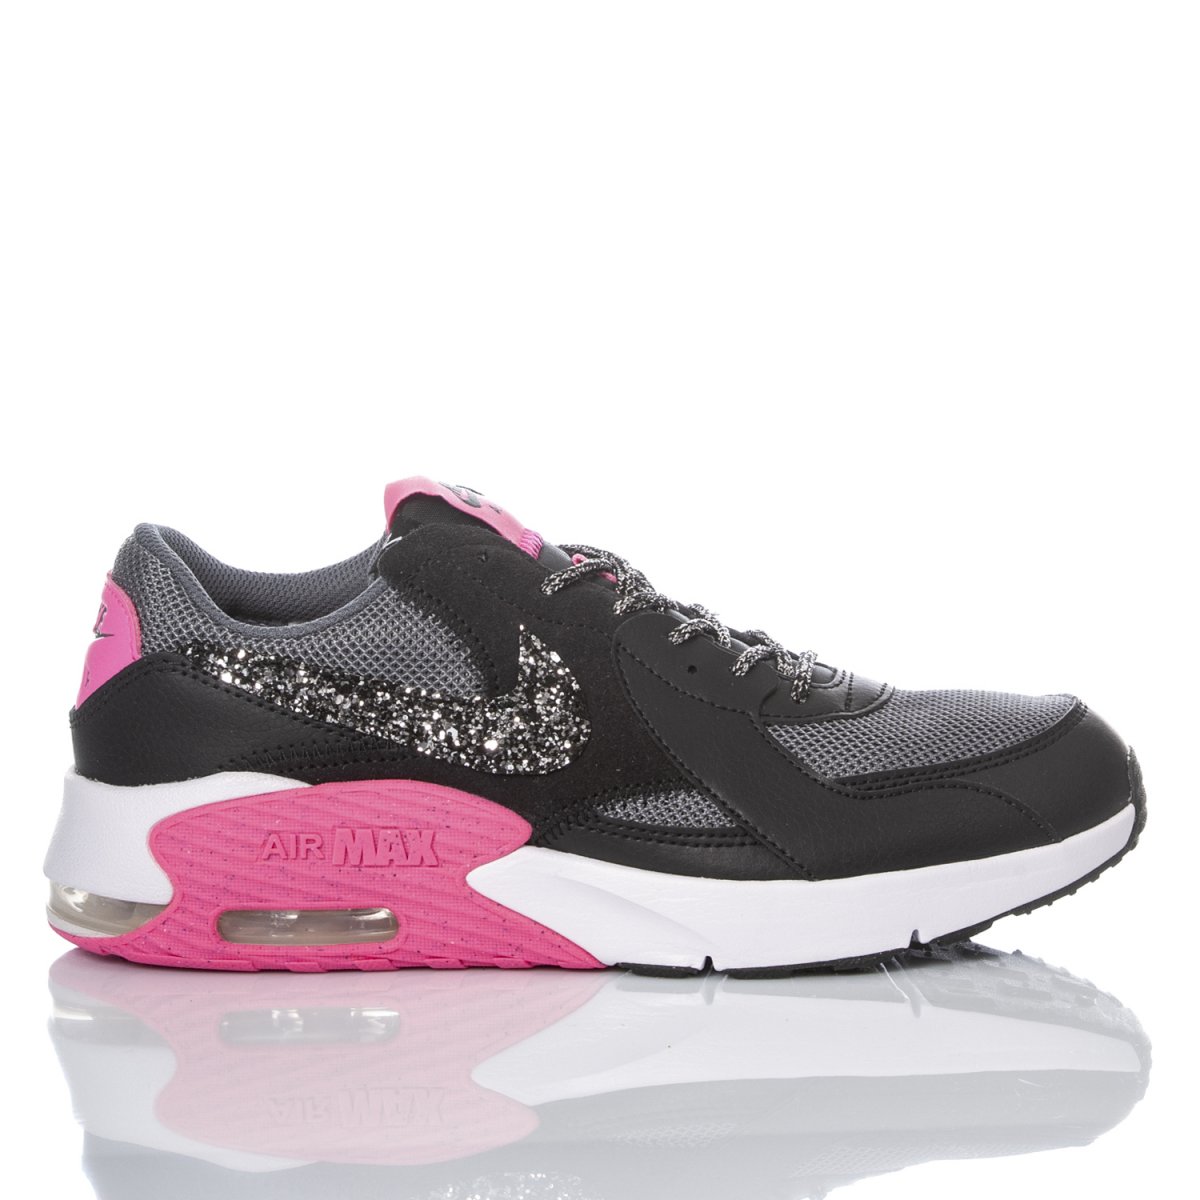 mattress Remarkable lesson Nike Air Max Pink Babe customized mimanera